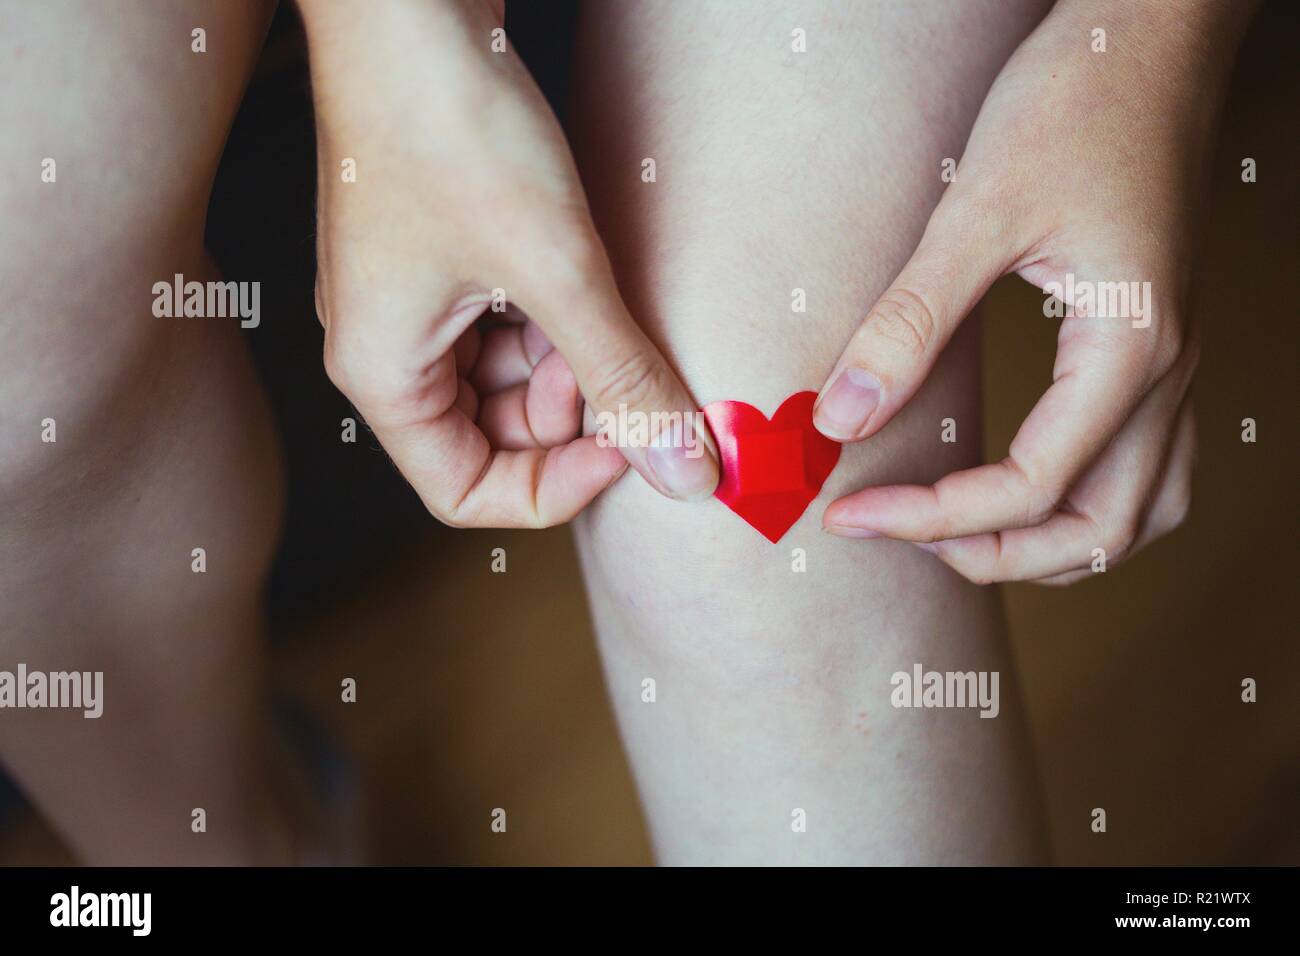 girl glues medical plaster in the form of a red heart on the leg Stock Photo